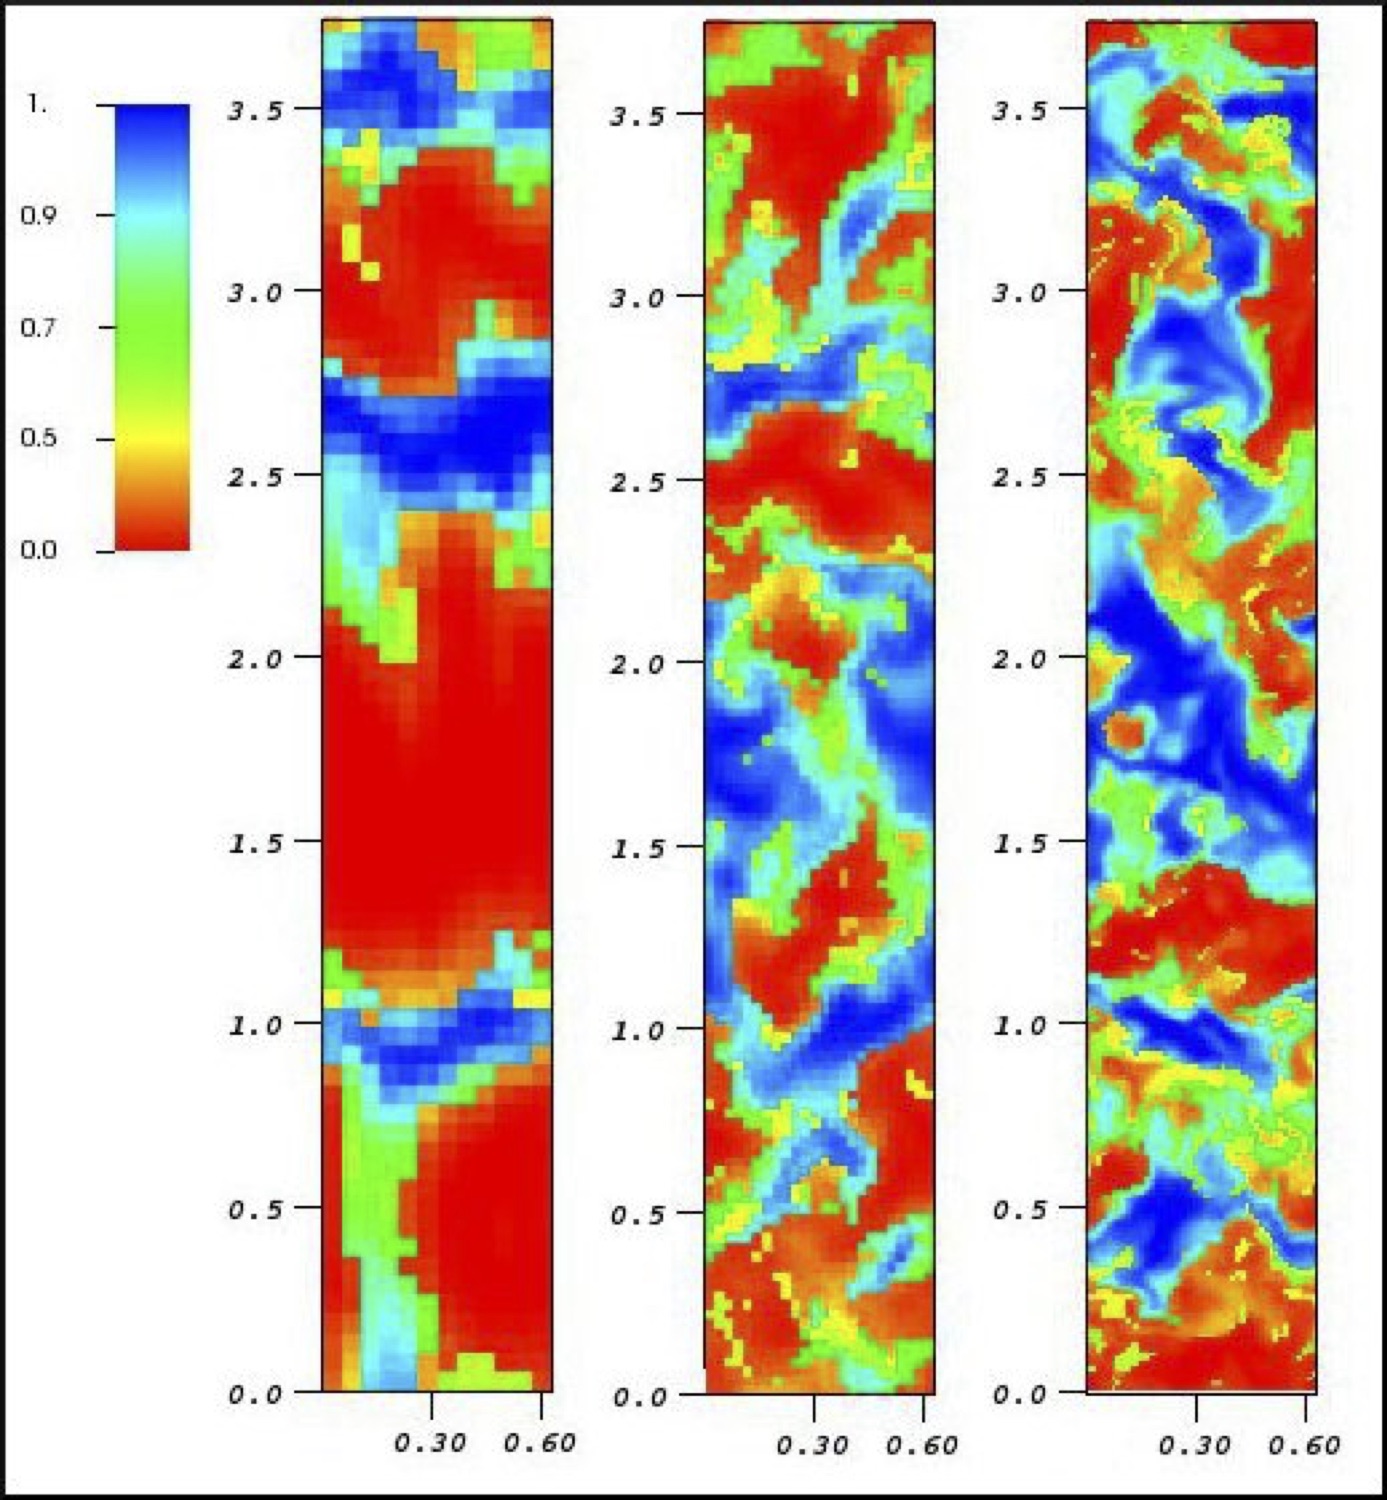 Heavy Fluid Concentration in the simulation of Rayleigh-Taylor instability